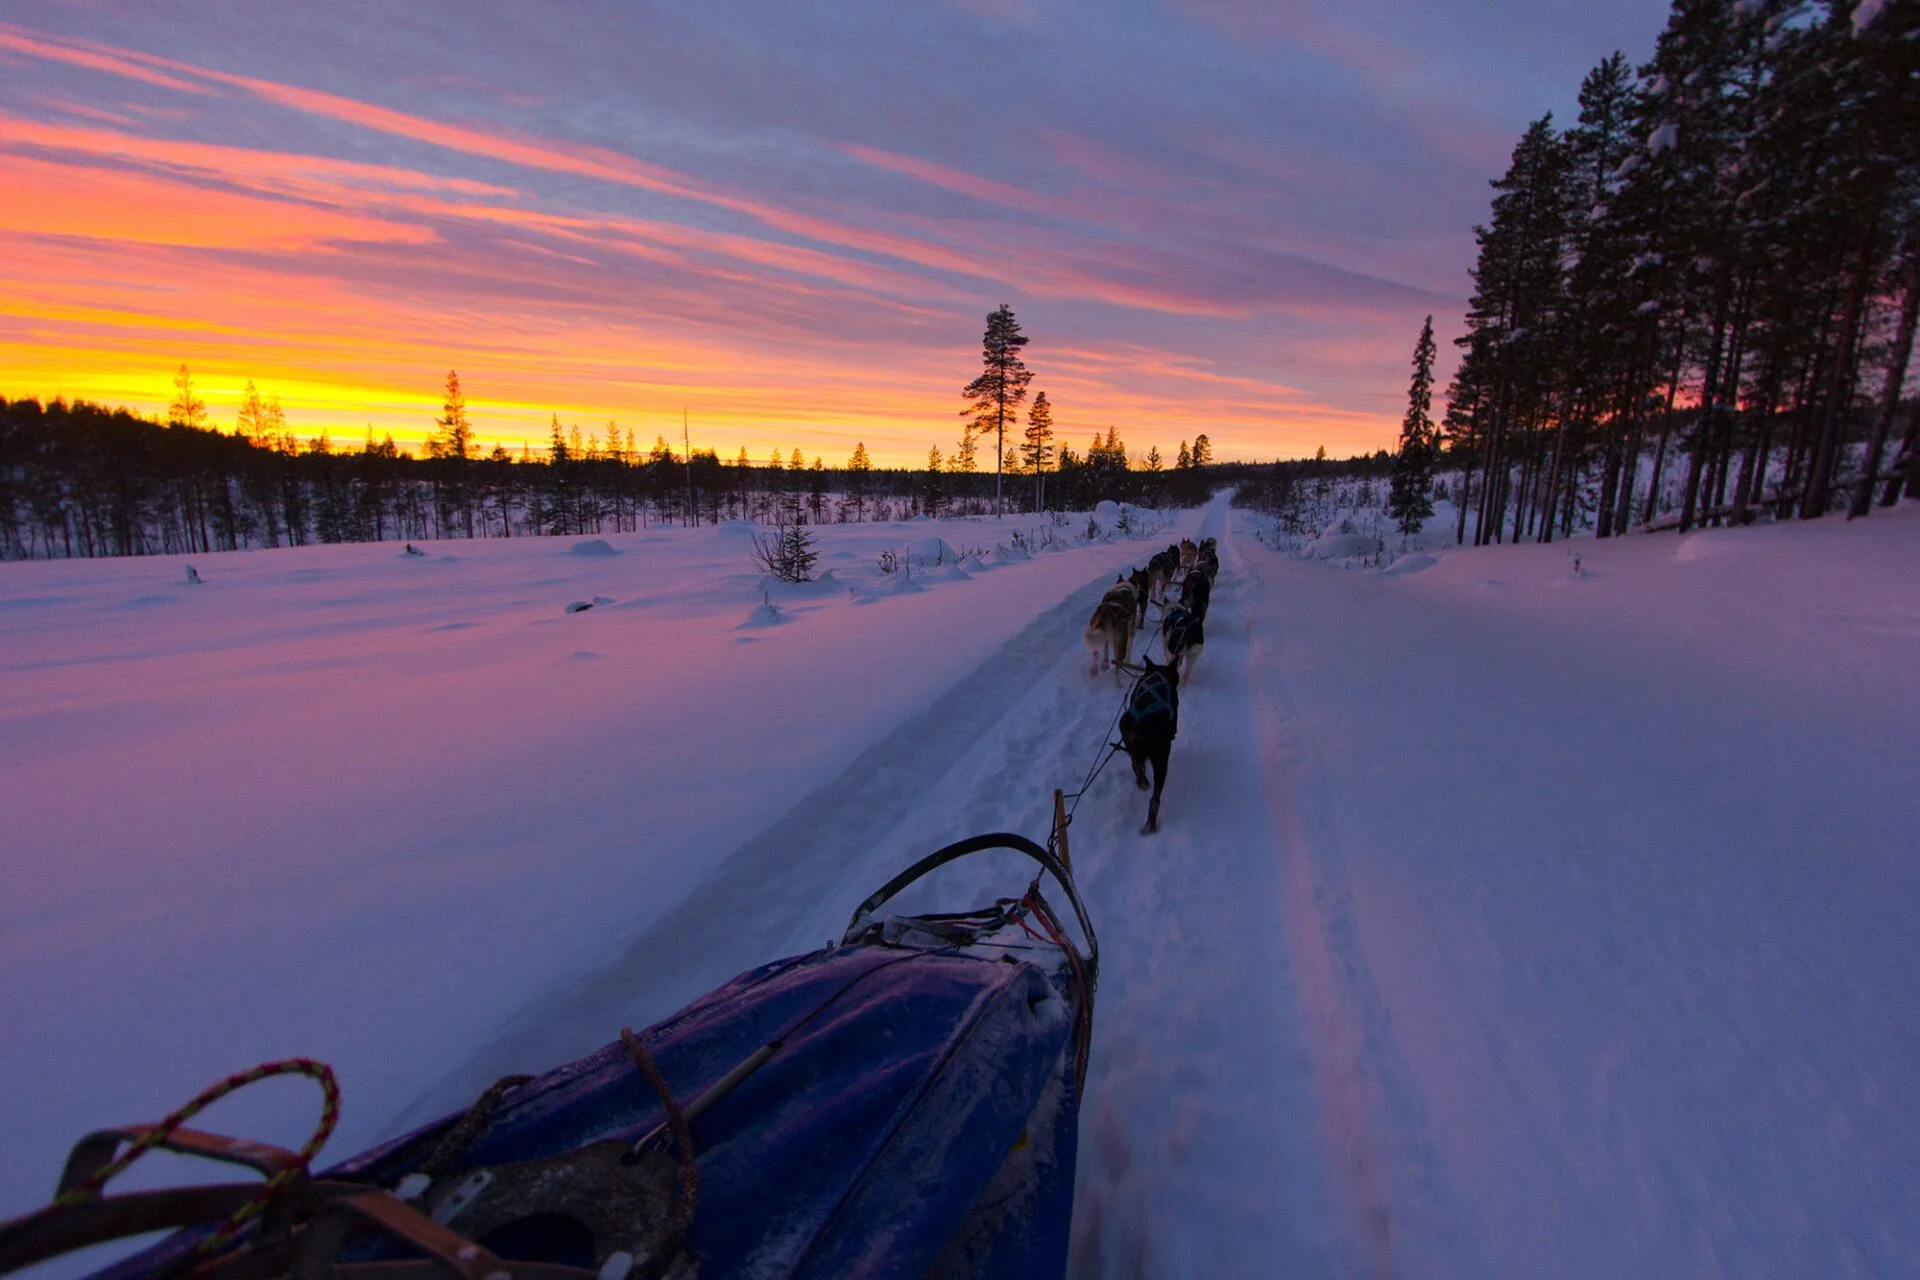 Wild and free mushing - A full day out in the wild thumbnail